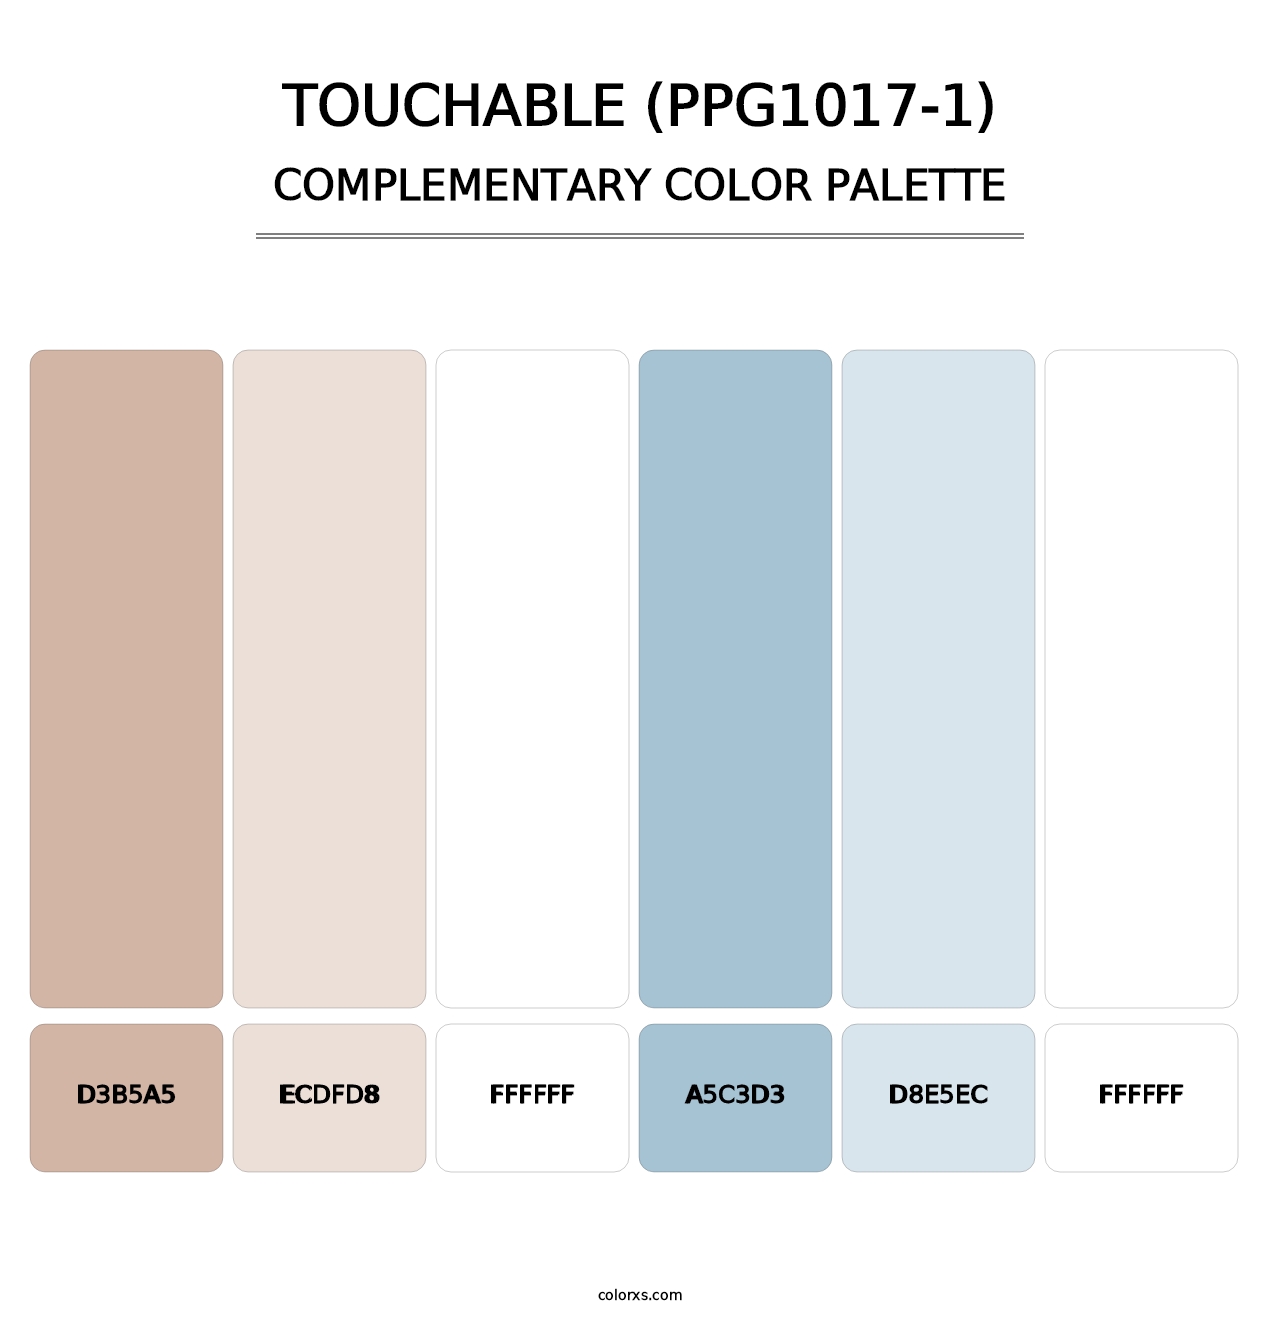 Touchable (PPG1017-1) - Complementary Color Palette